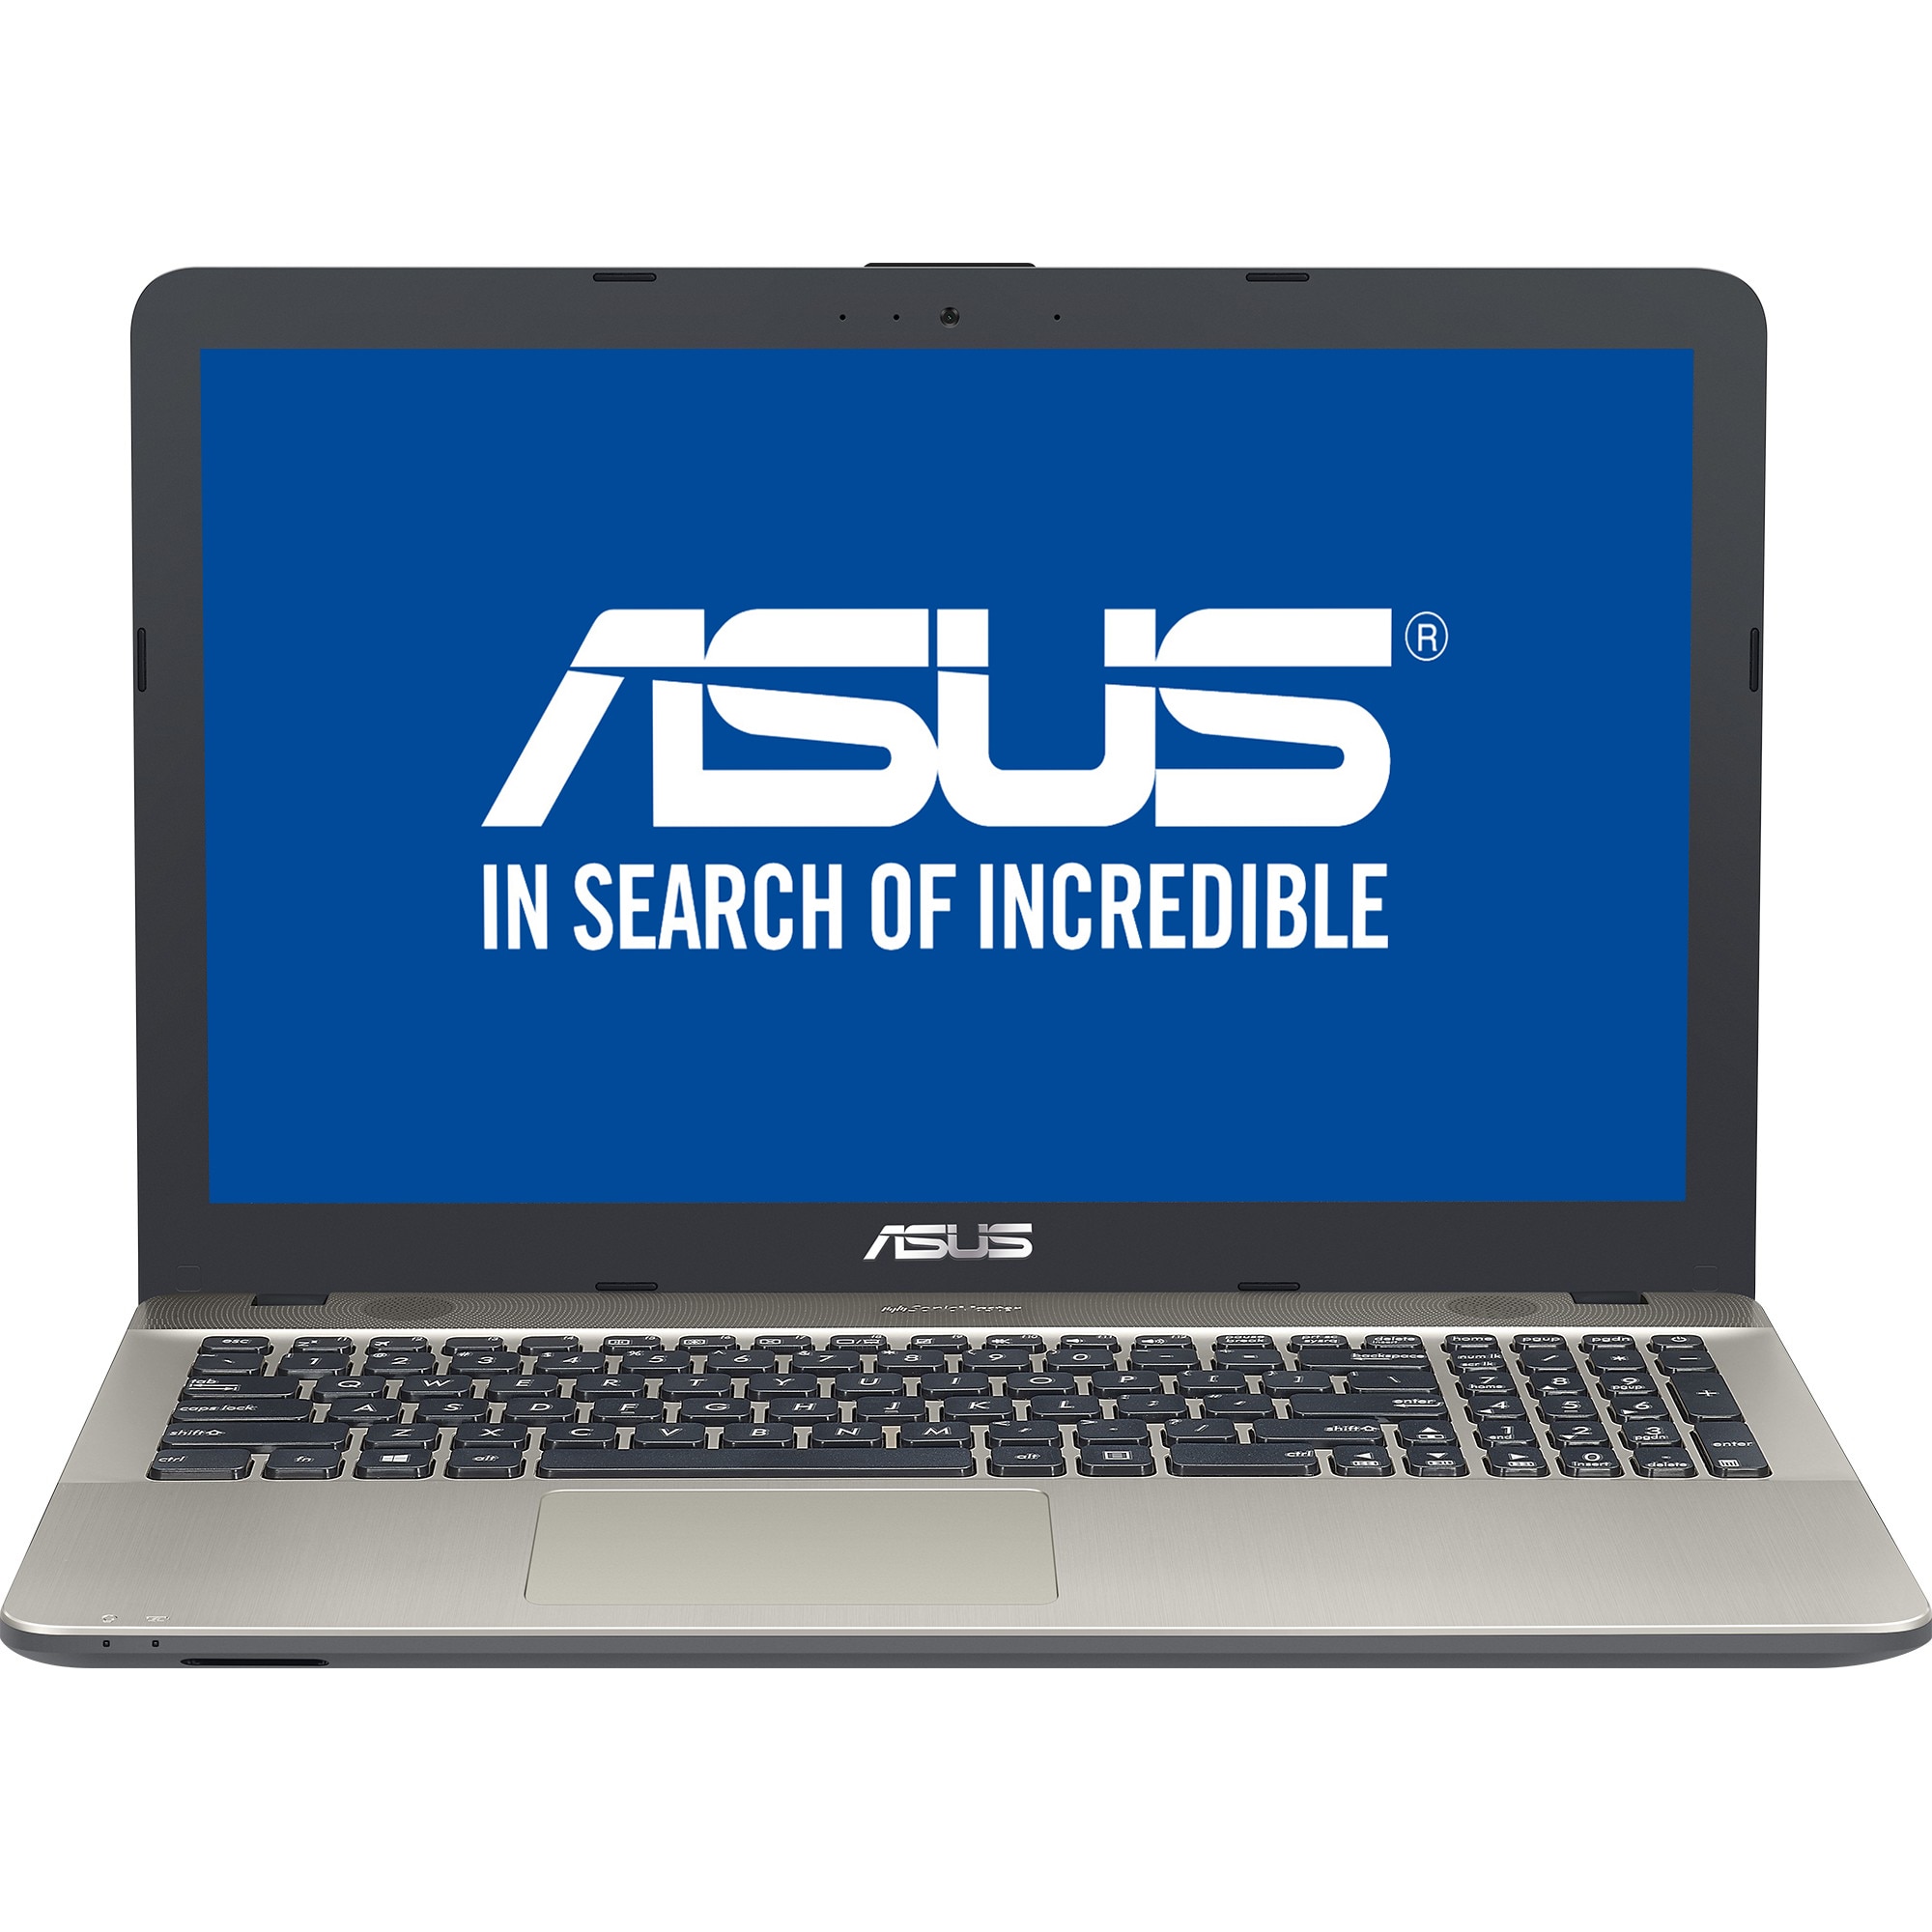 Existence crater type Laptop ASUS X541NA-GO170 cu procesor Intel® Dual-Core Celeron® N3350 pana  la 2.40 GHz, 15.6", 4GB, 128GB SSD, Endless OS, Chocolate Black - eMAG.ro